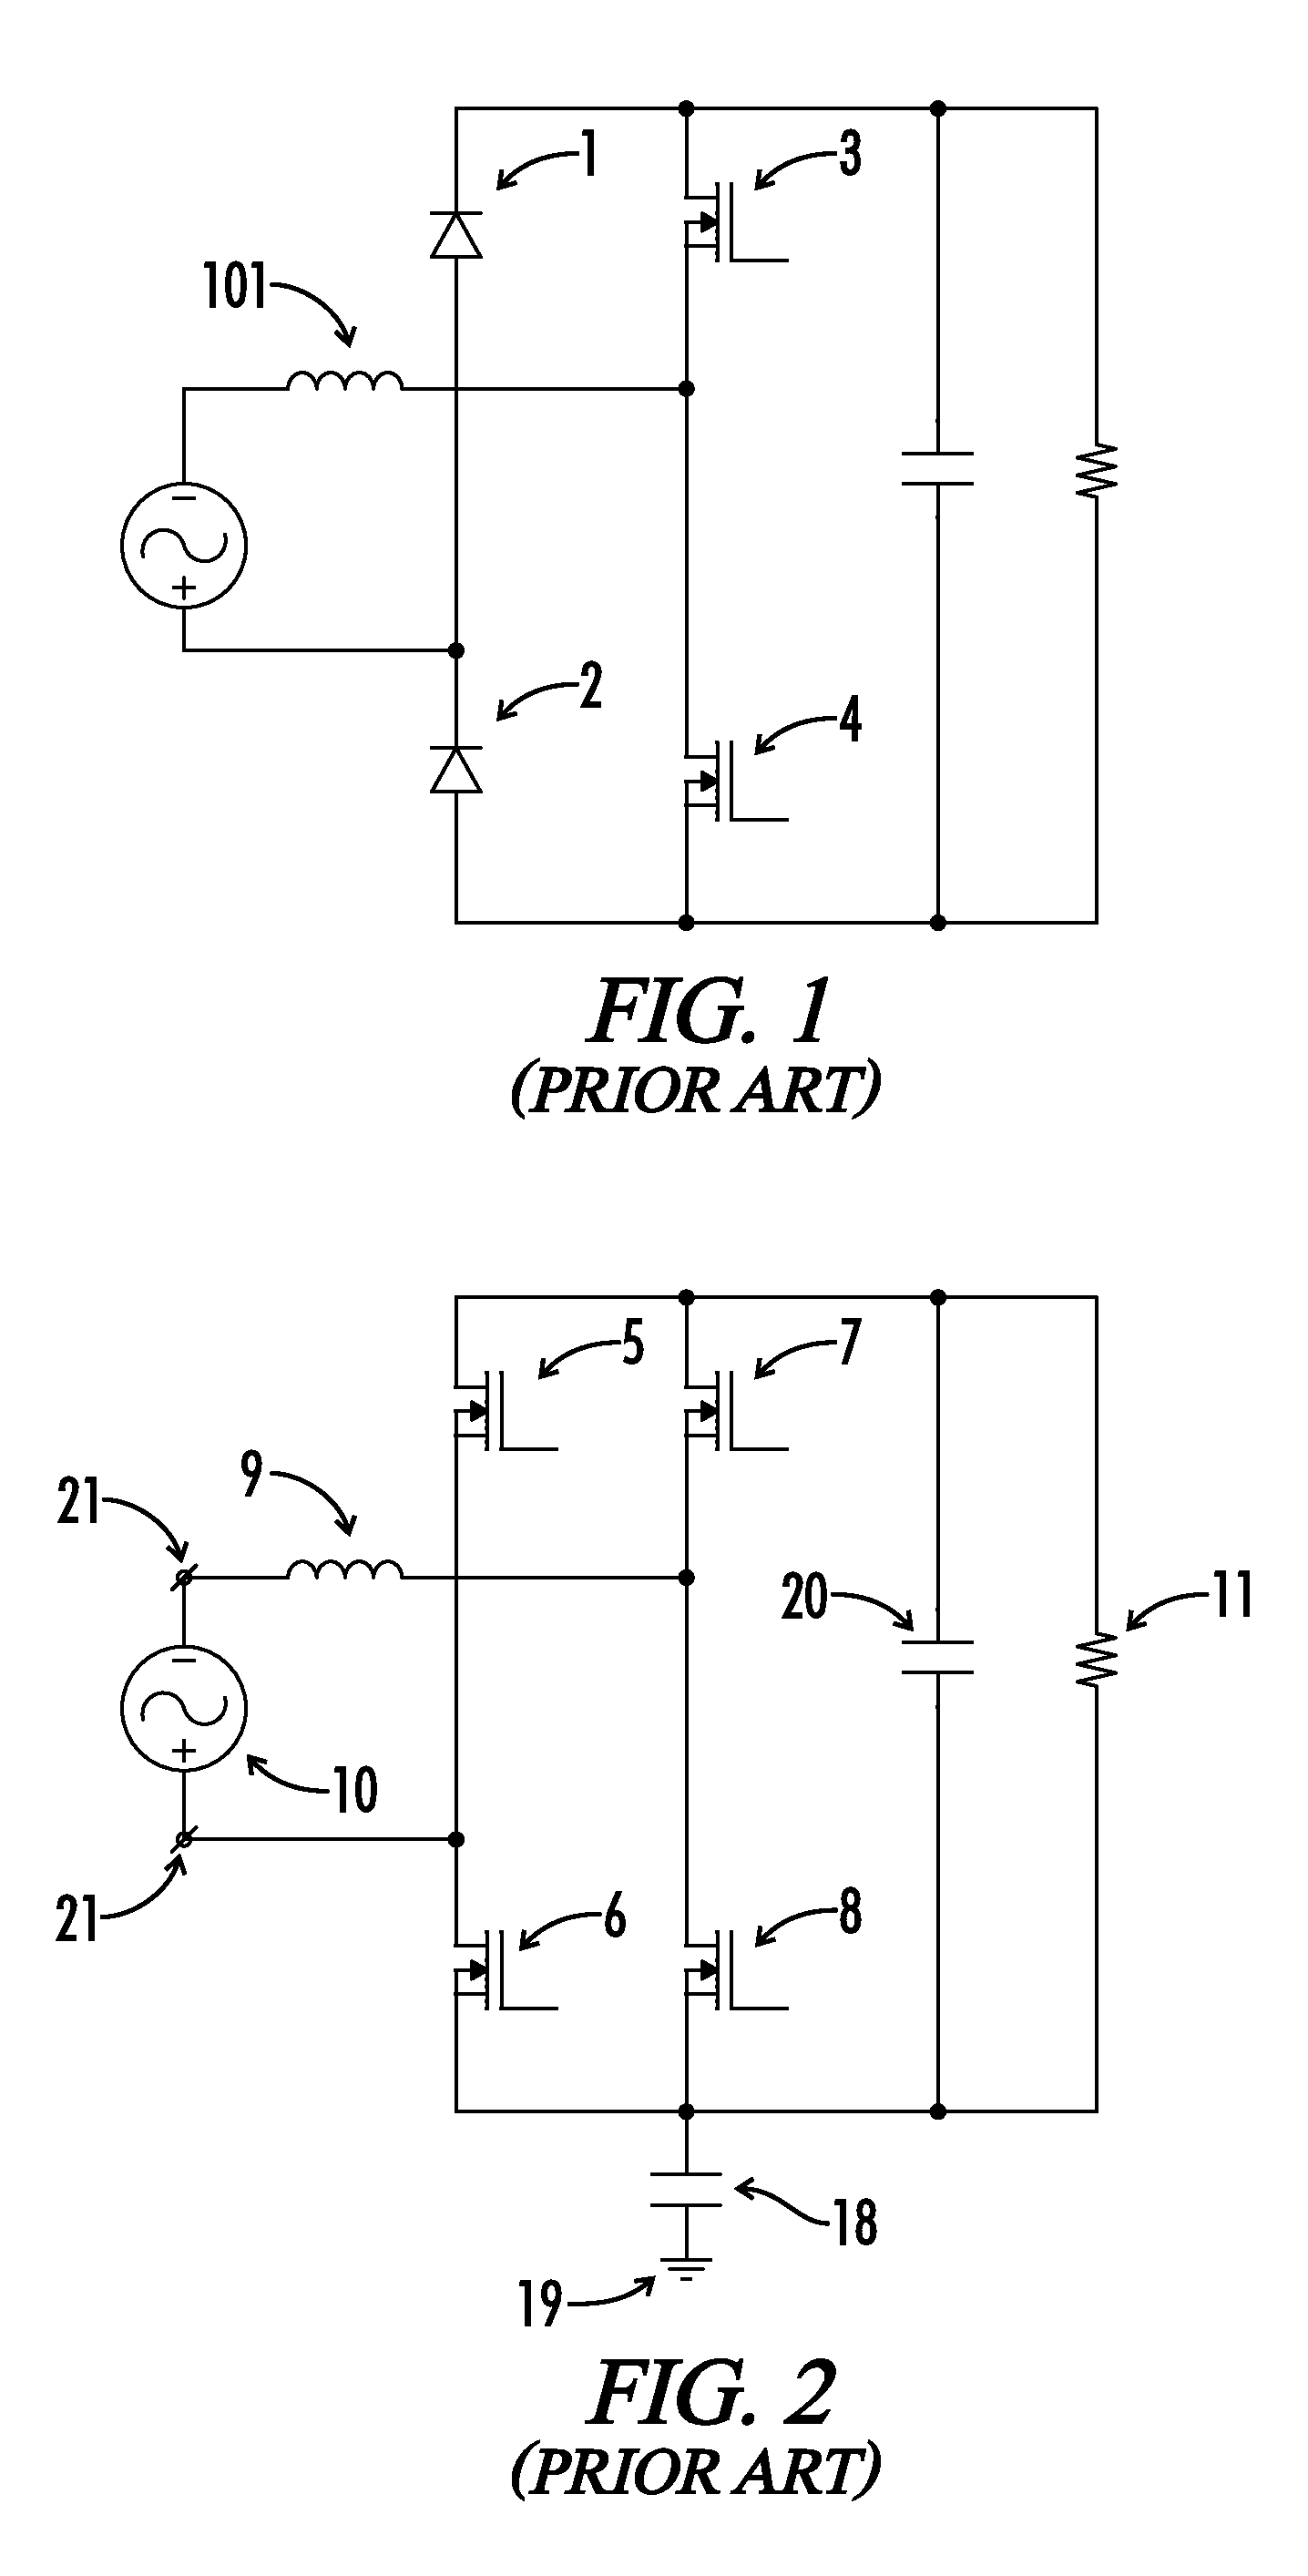 Power converter with non-symmetrical totem pole rectifier and current-shaping branch circuits